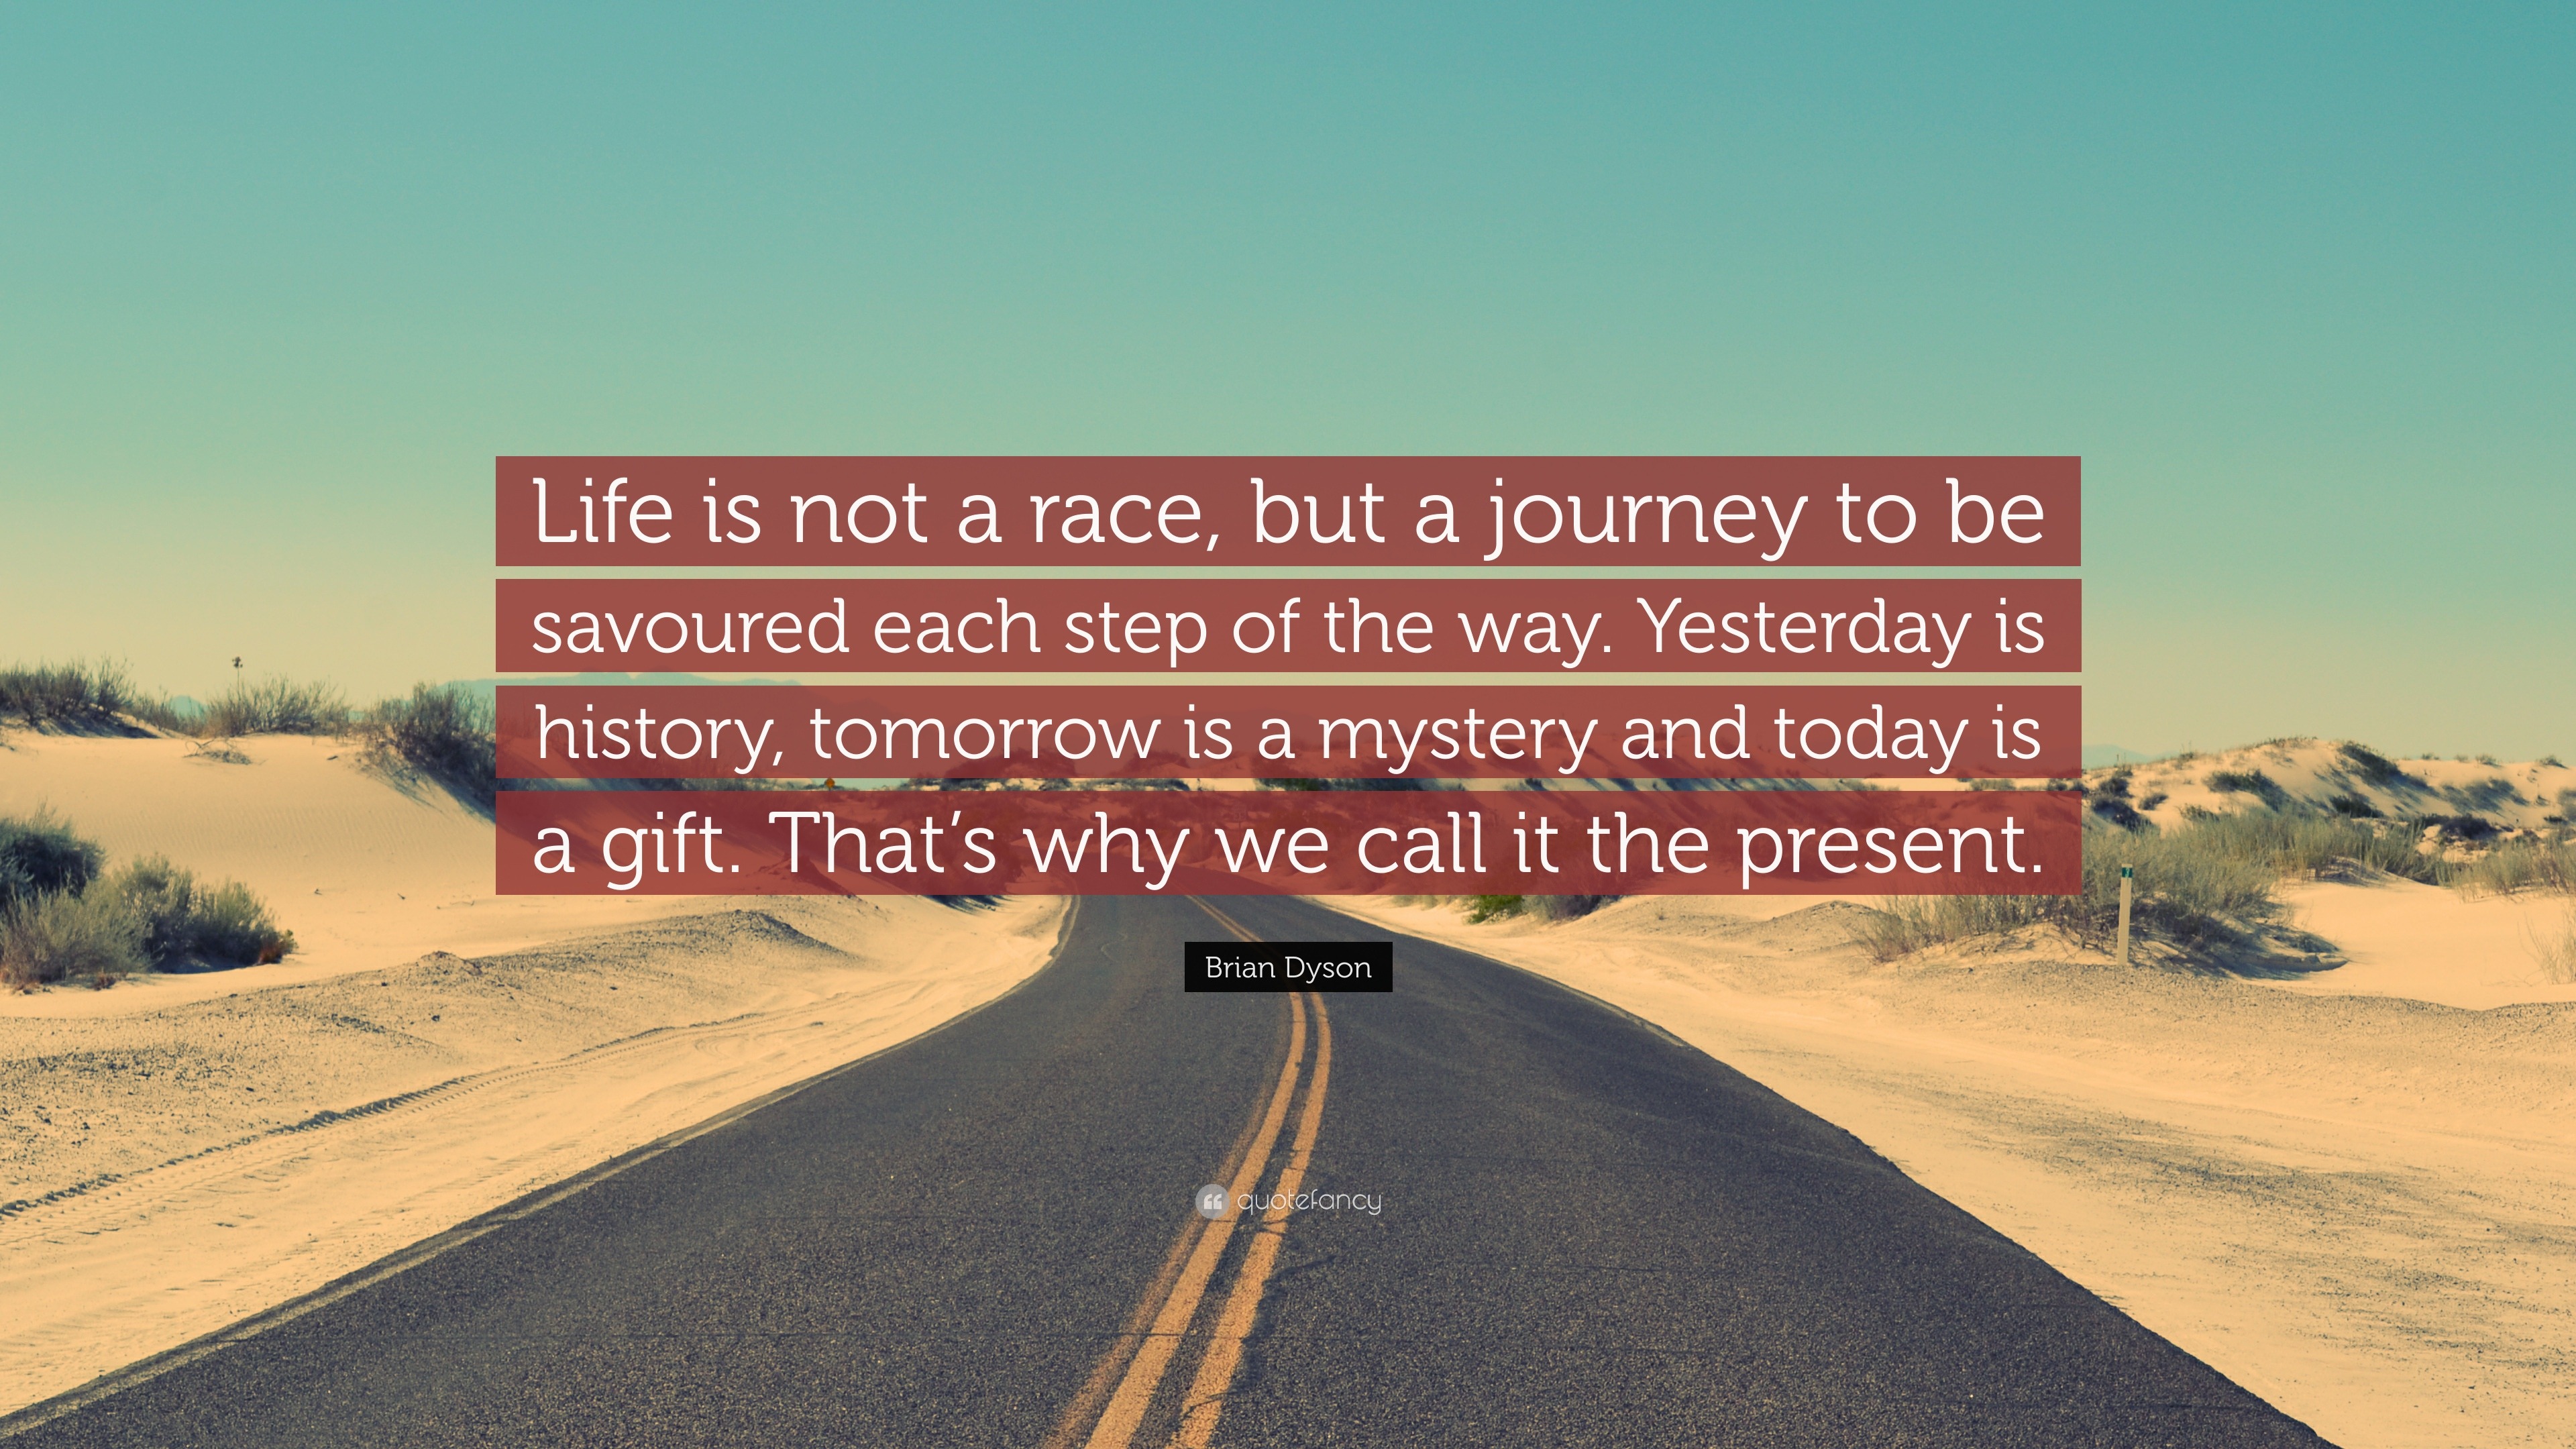 Quotes About Journey: 110 Best Life Journey & Journey Quotes